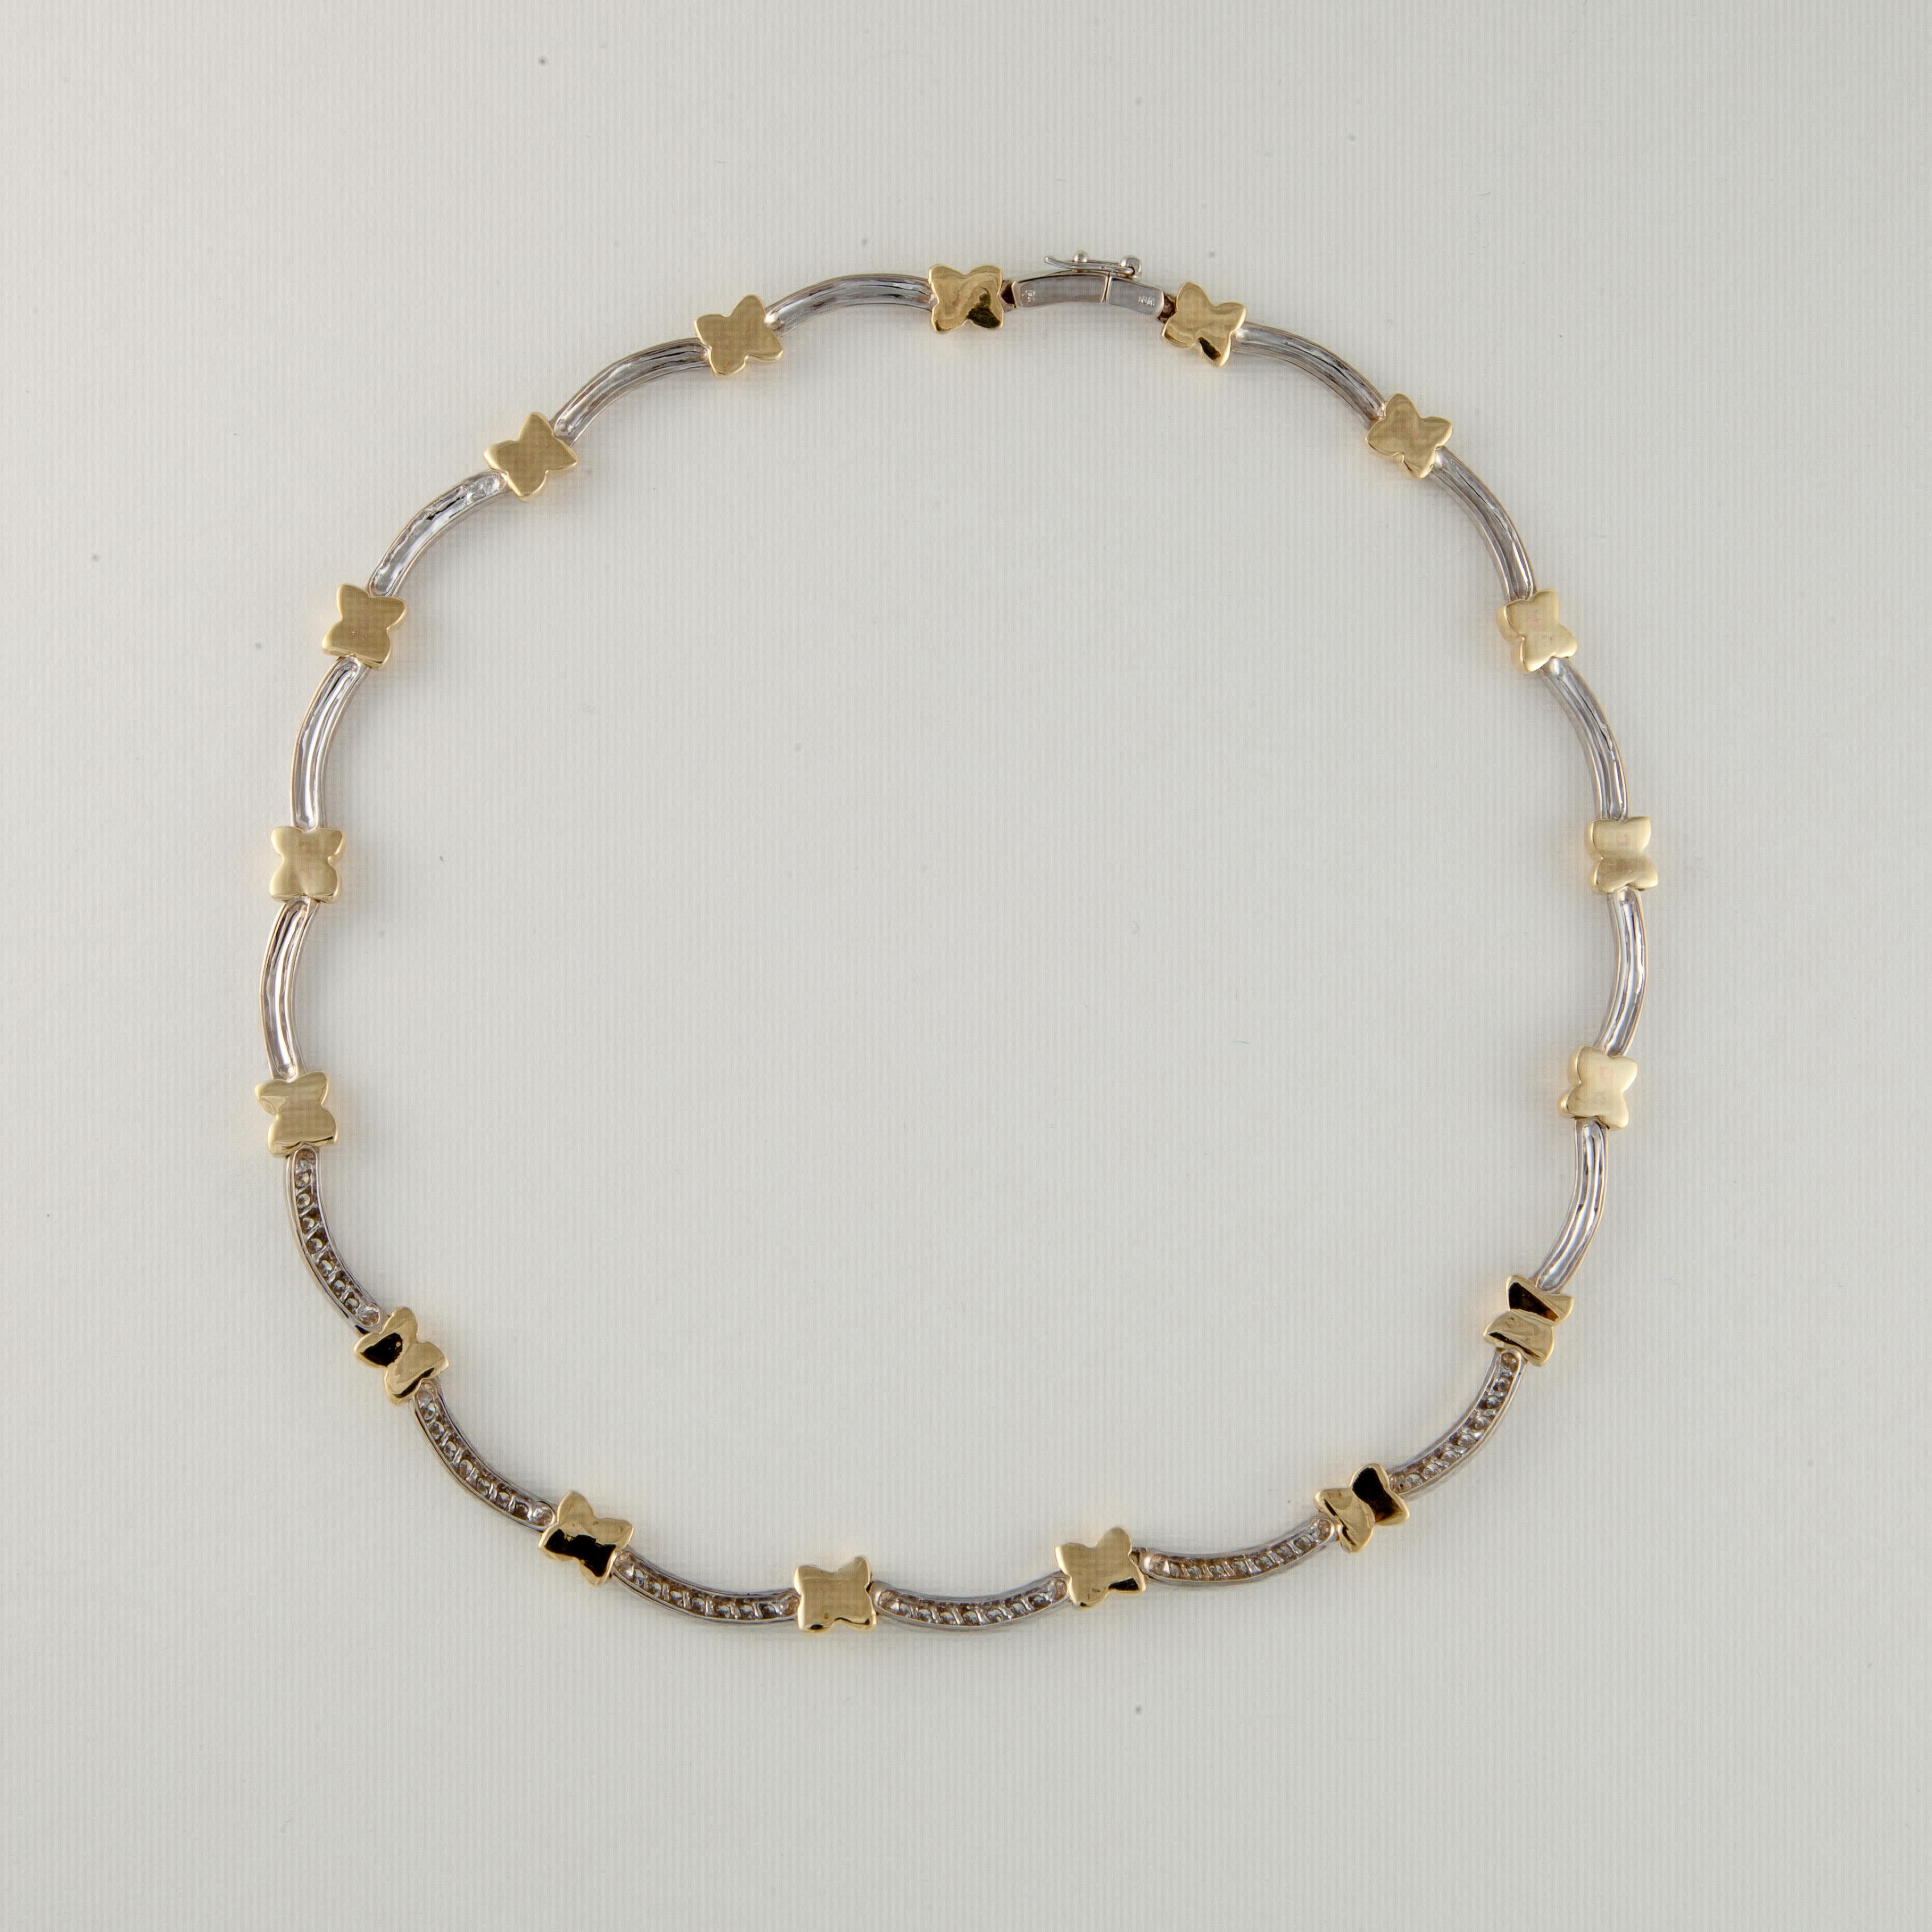 18K two-tone gold scalloped necklace with diamonds.  There are 42 round diamonds totaling 1.75 carats; G-H color and VS-SI clarity.  The necklace measures 17 inches long and is 1/4 inches wide.  